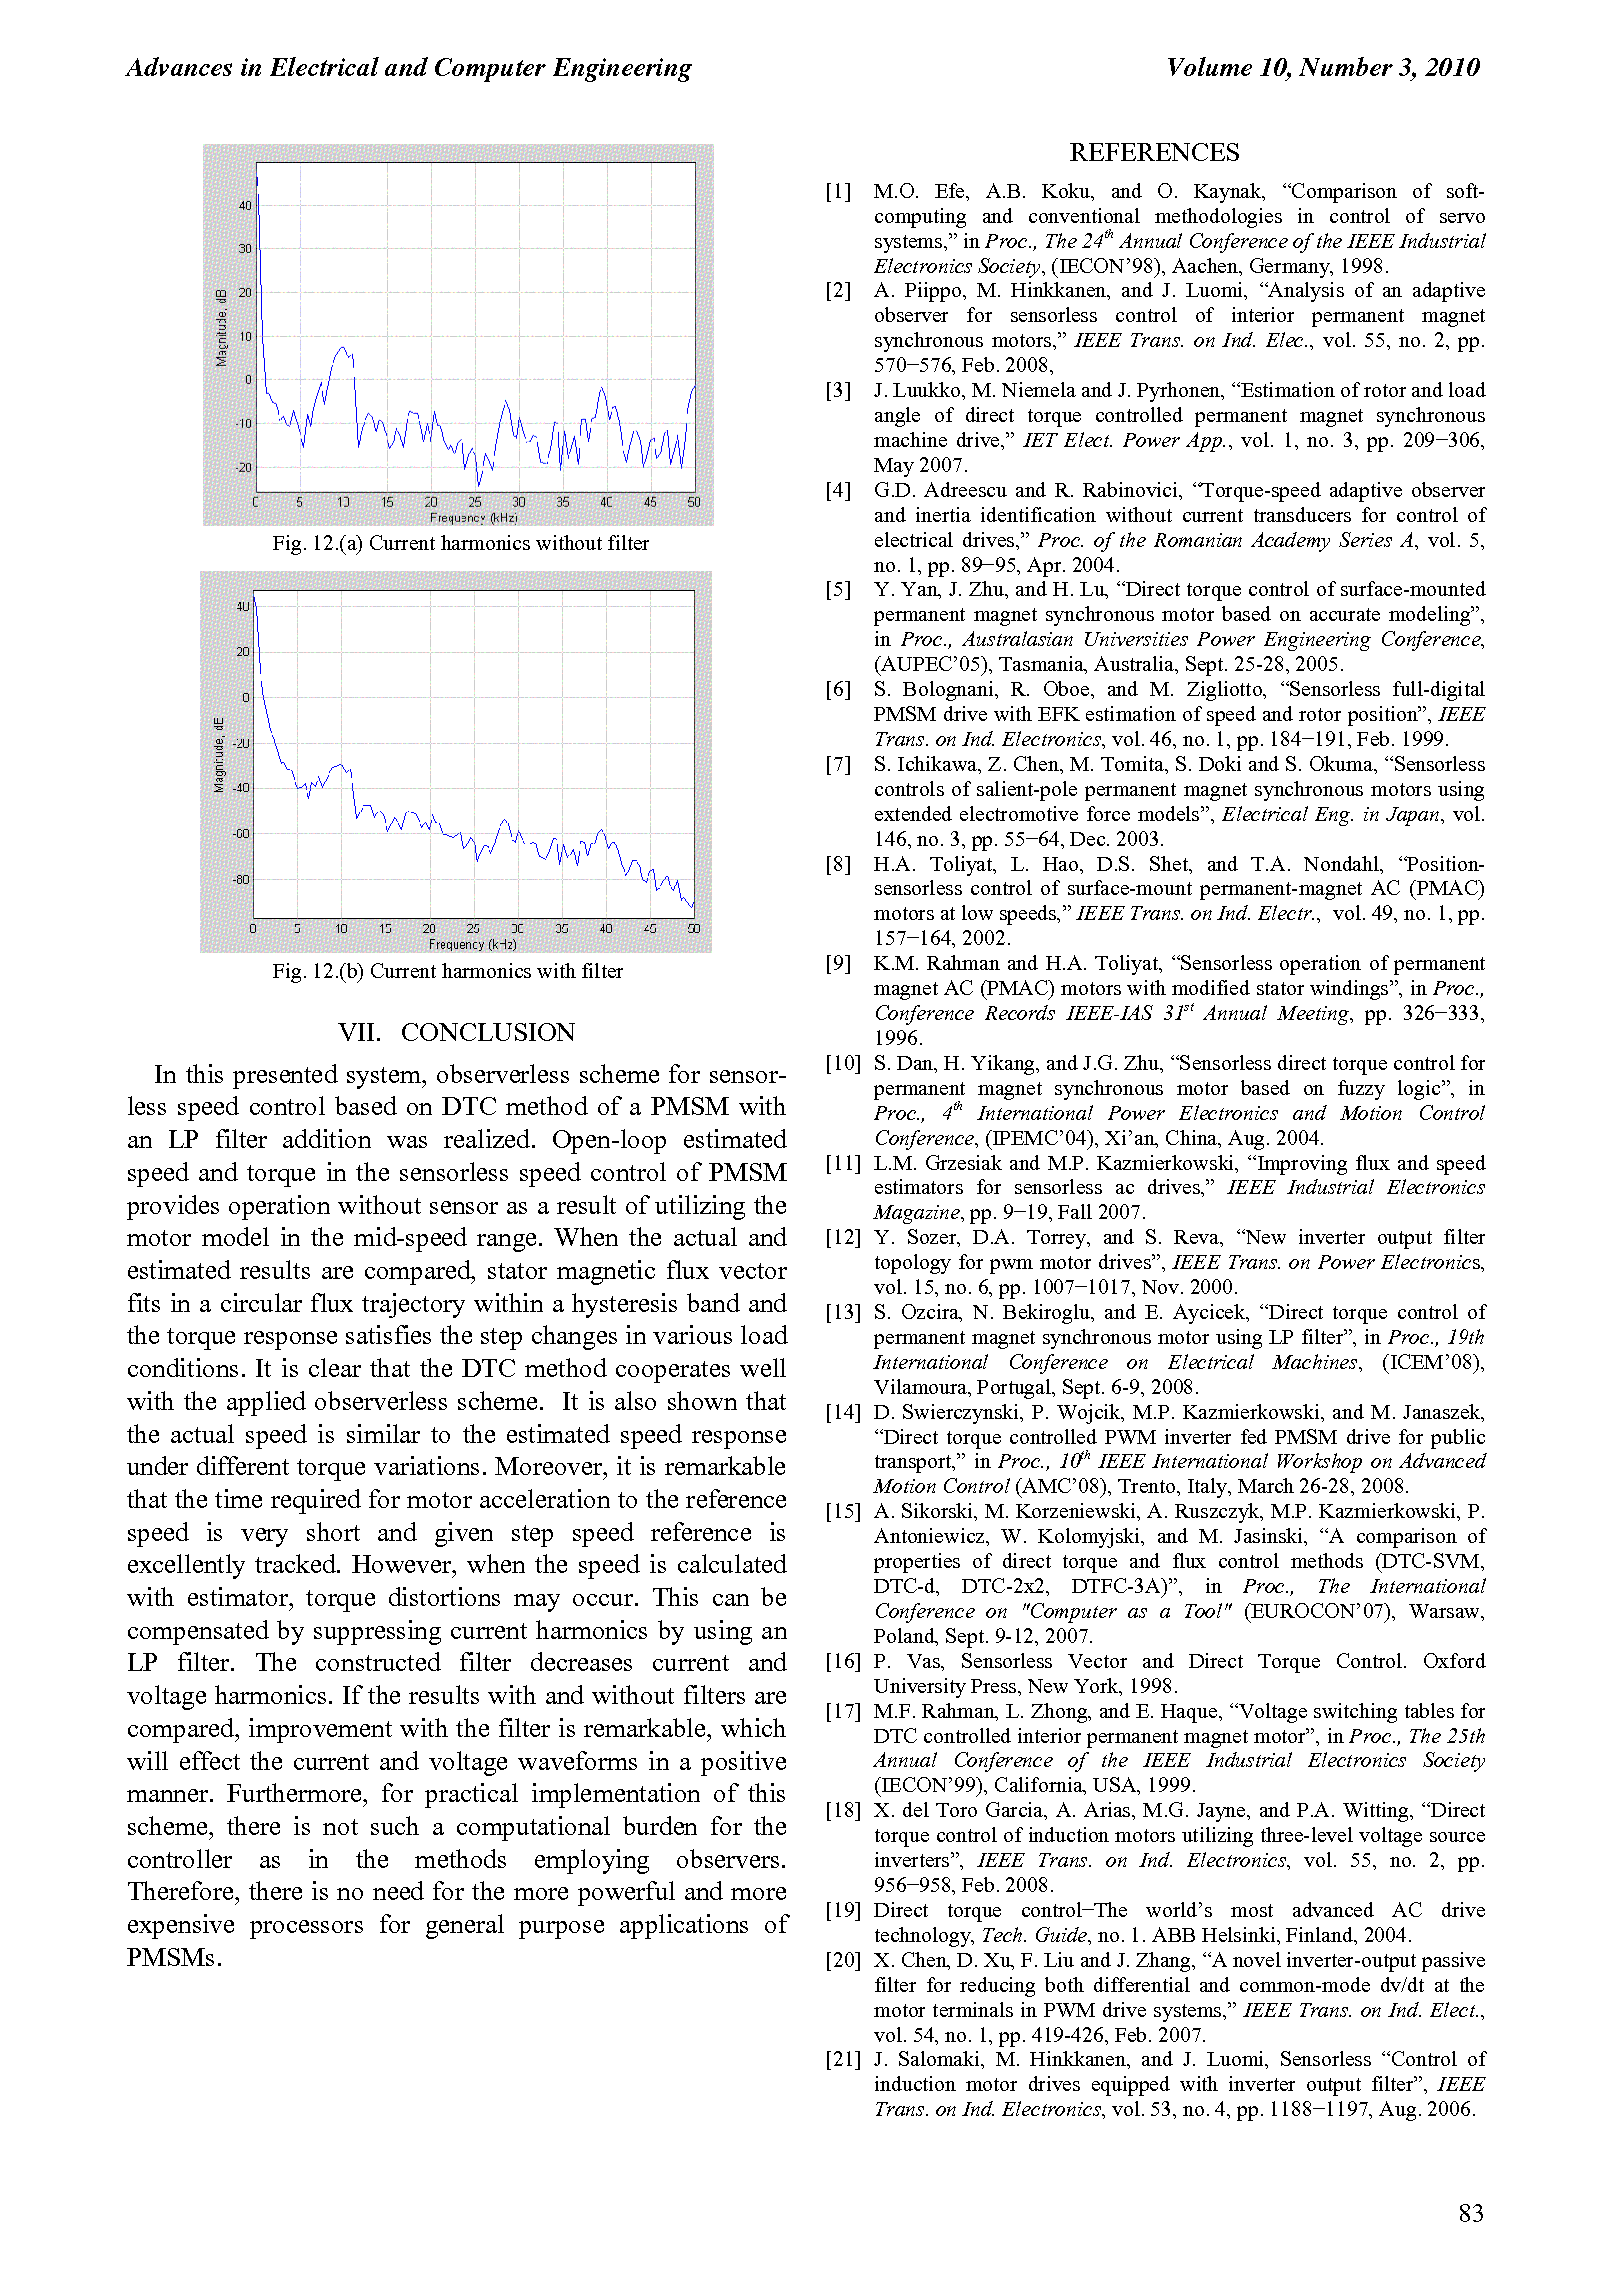 PDF Quickview for paper with DOI:10.4316/AECE.2010.03013